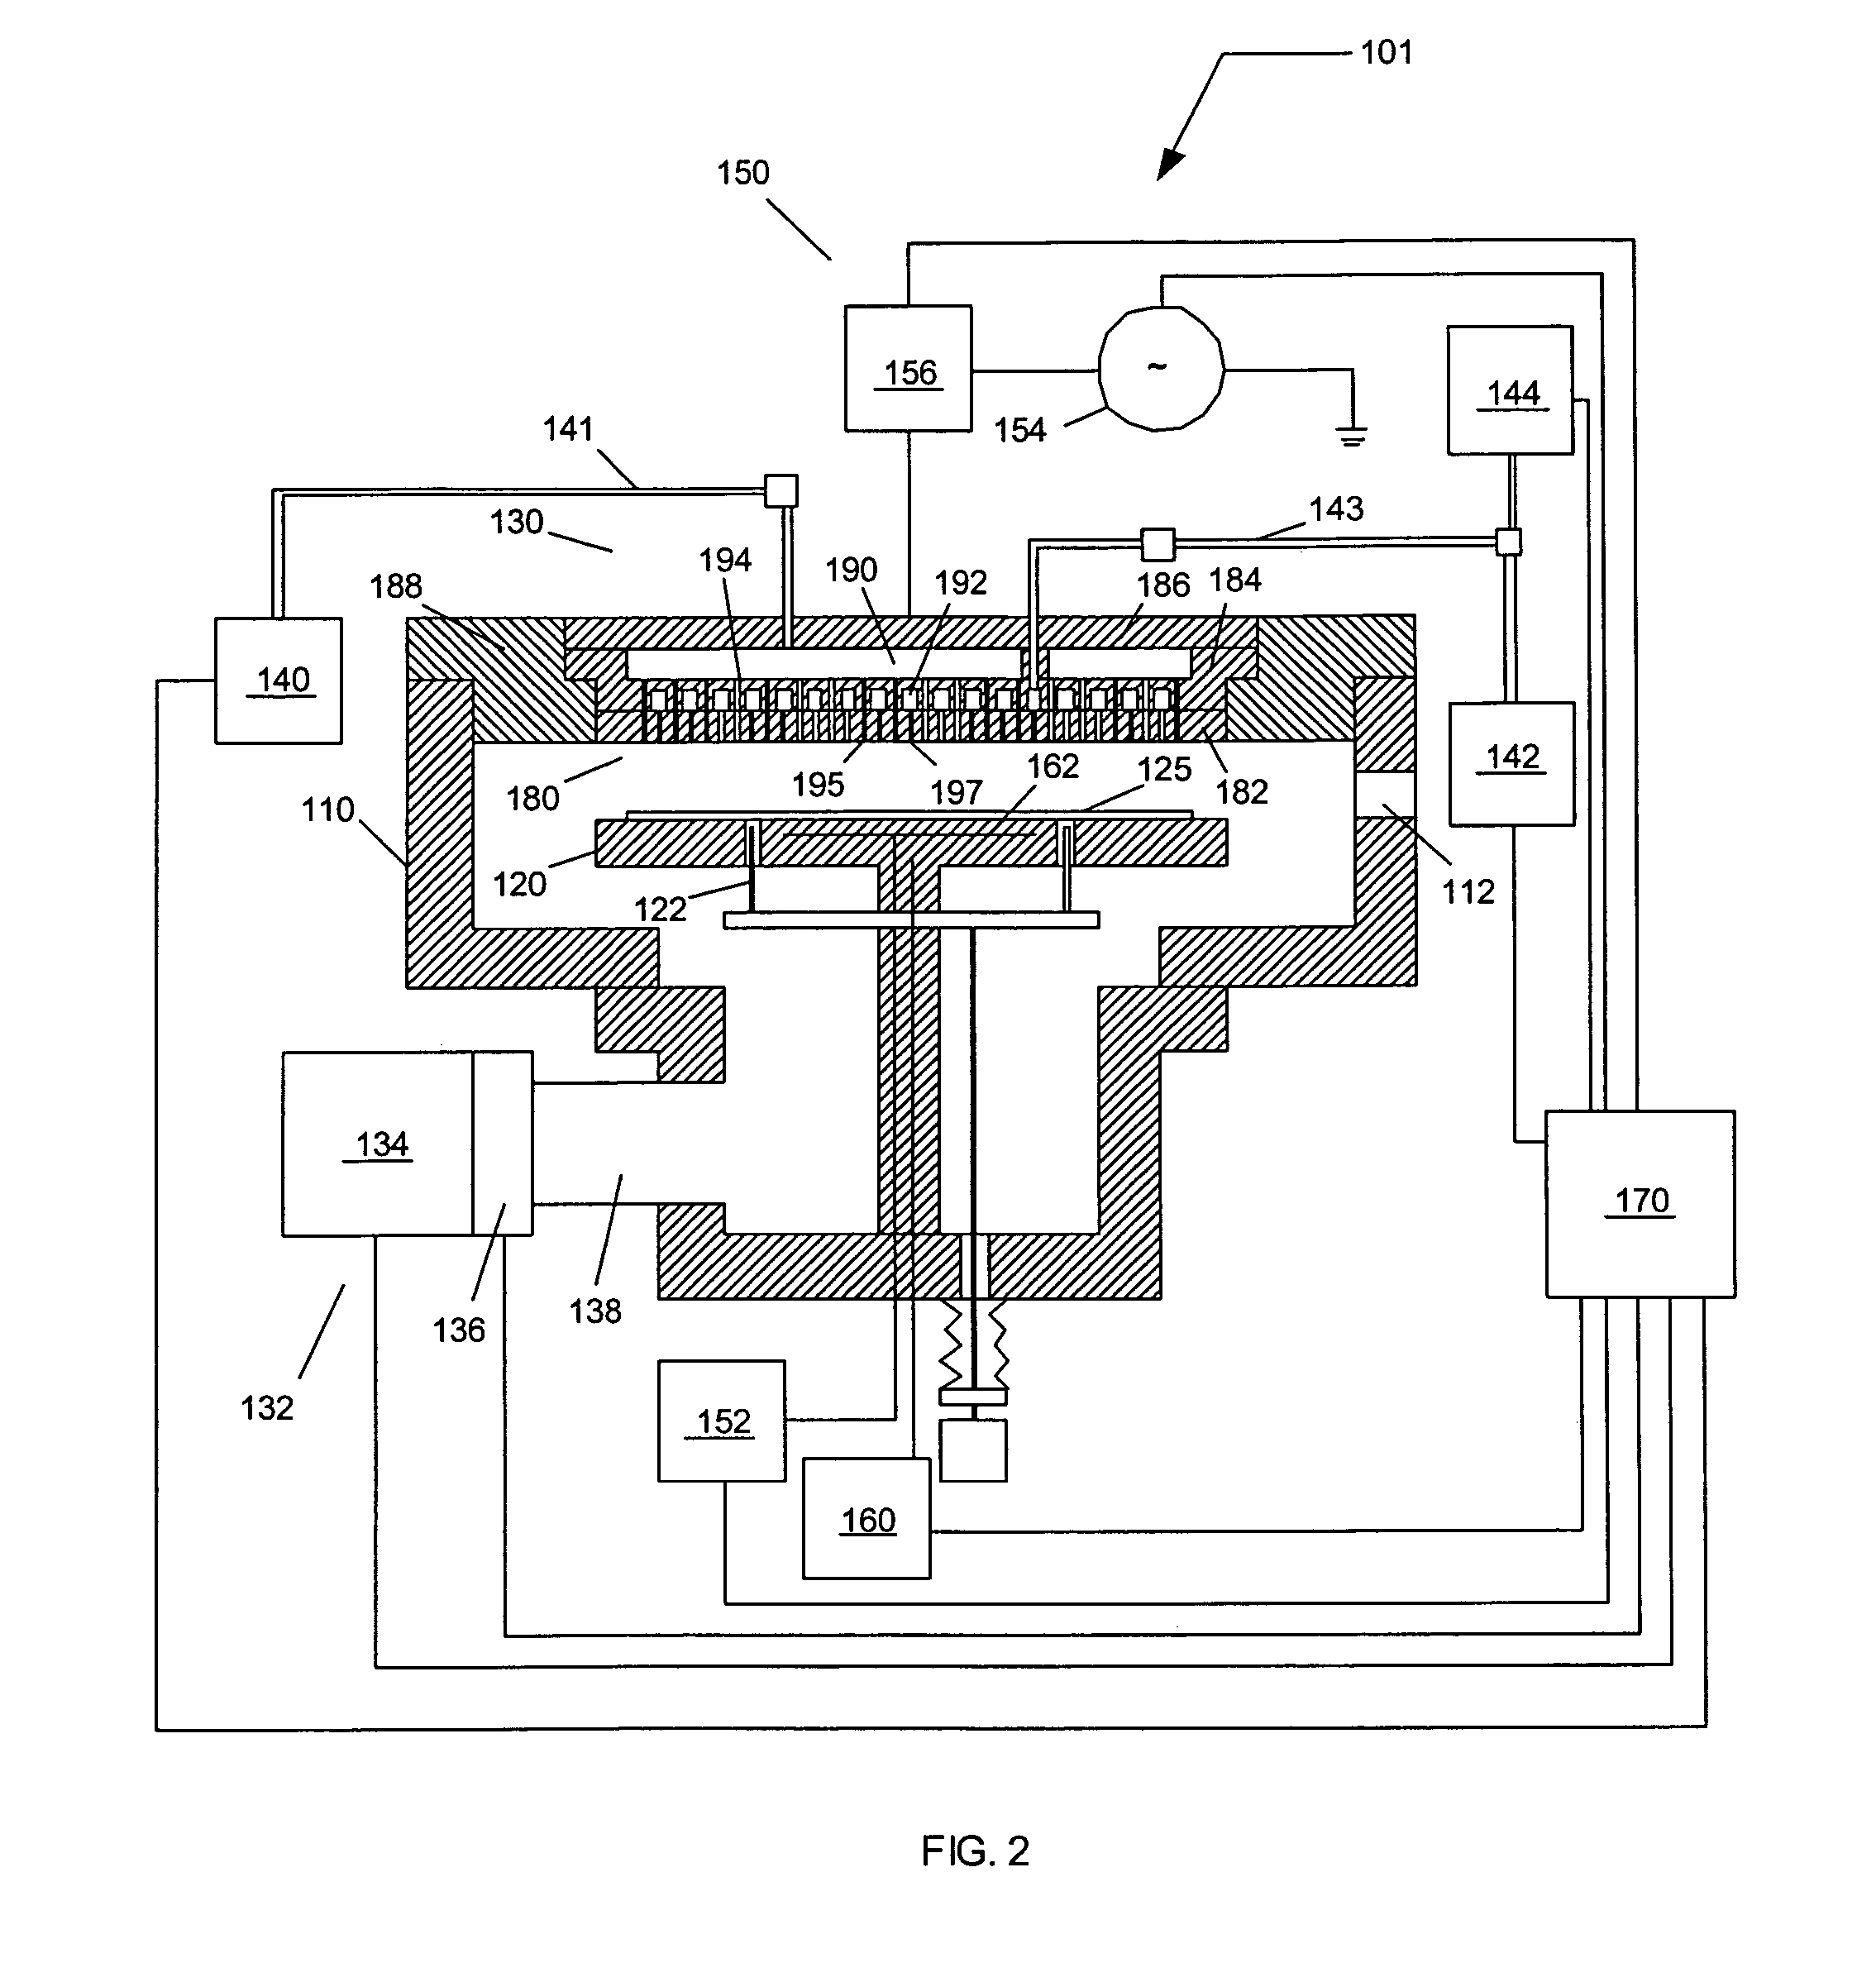 Method of plasma enhanced atomic layer deposition of TaC and TaCN films having good adhesion to copper